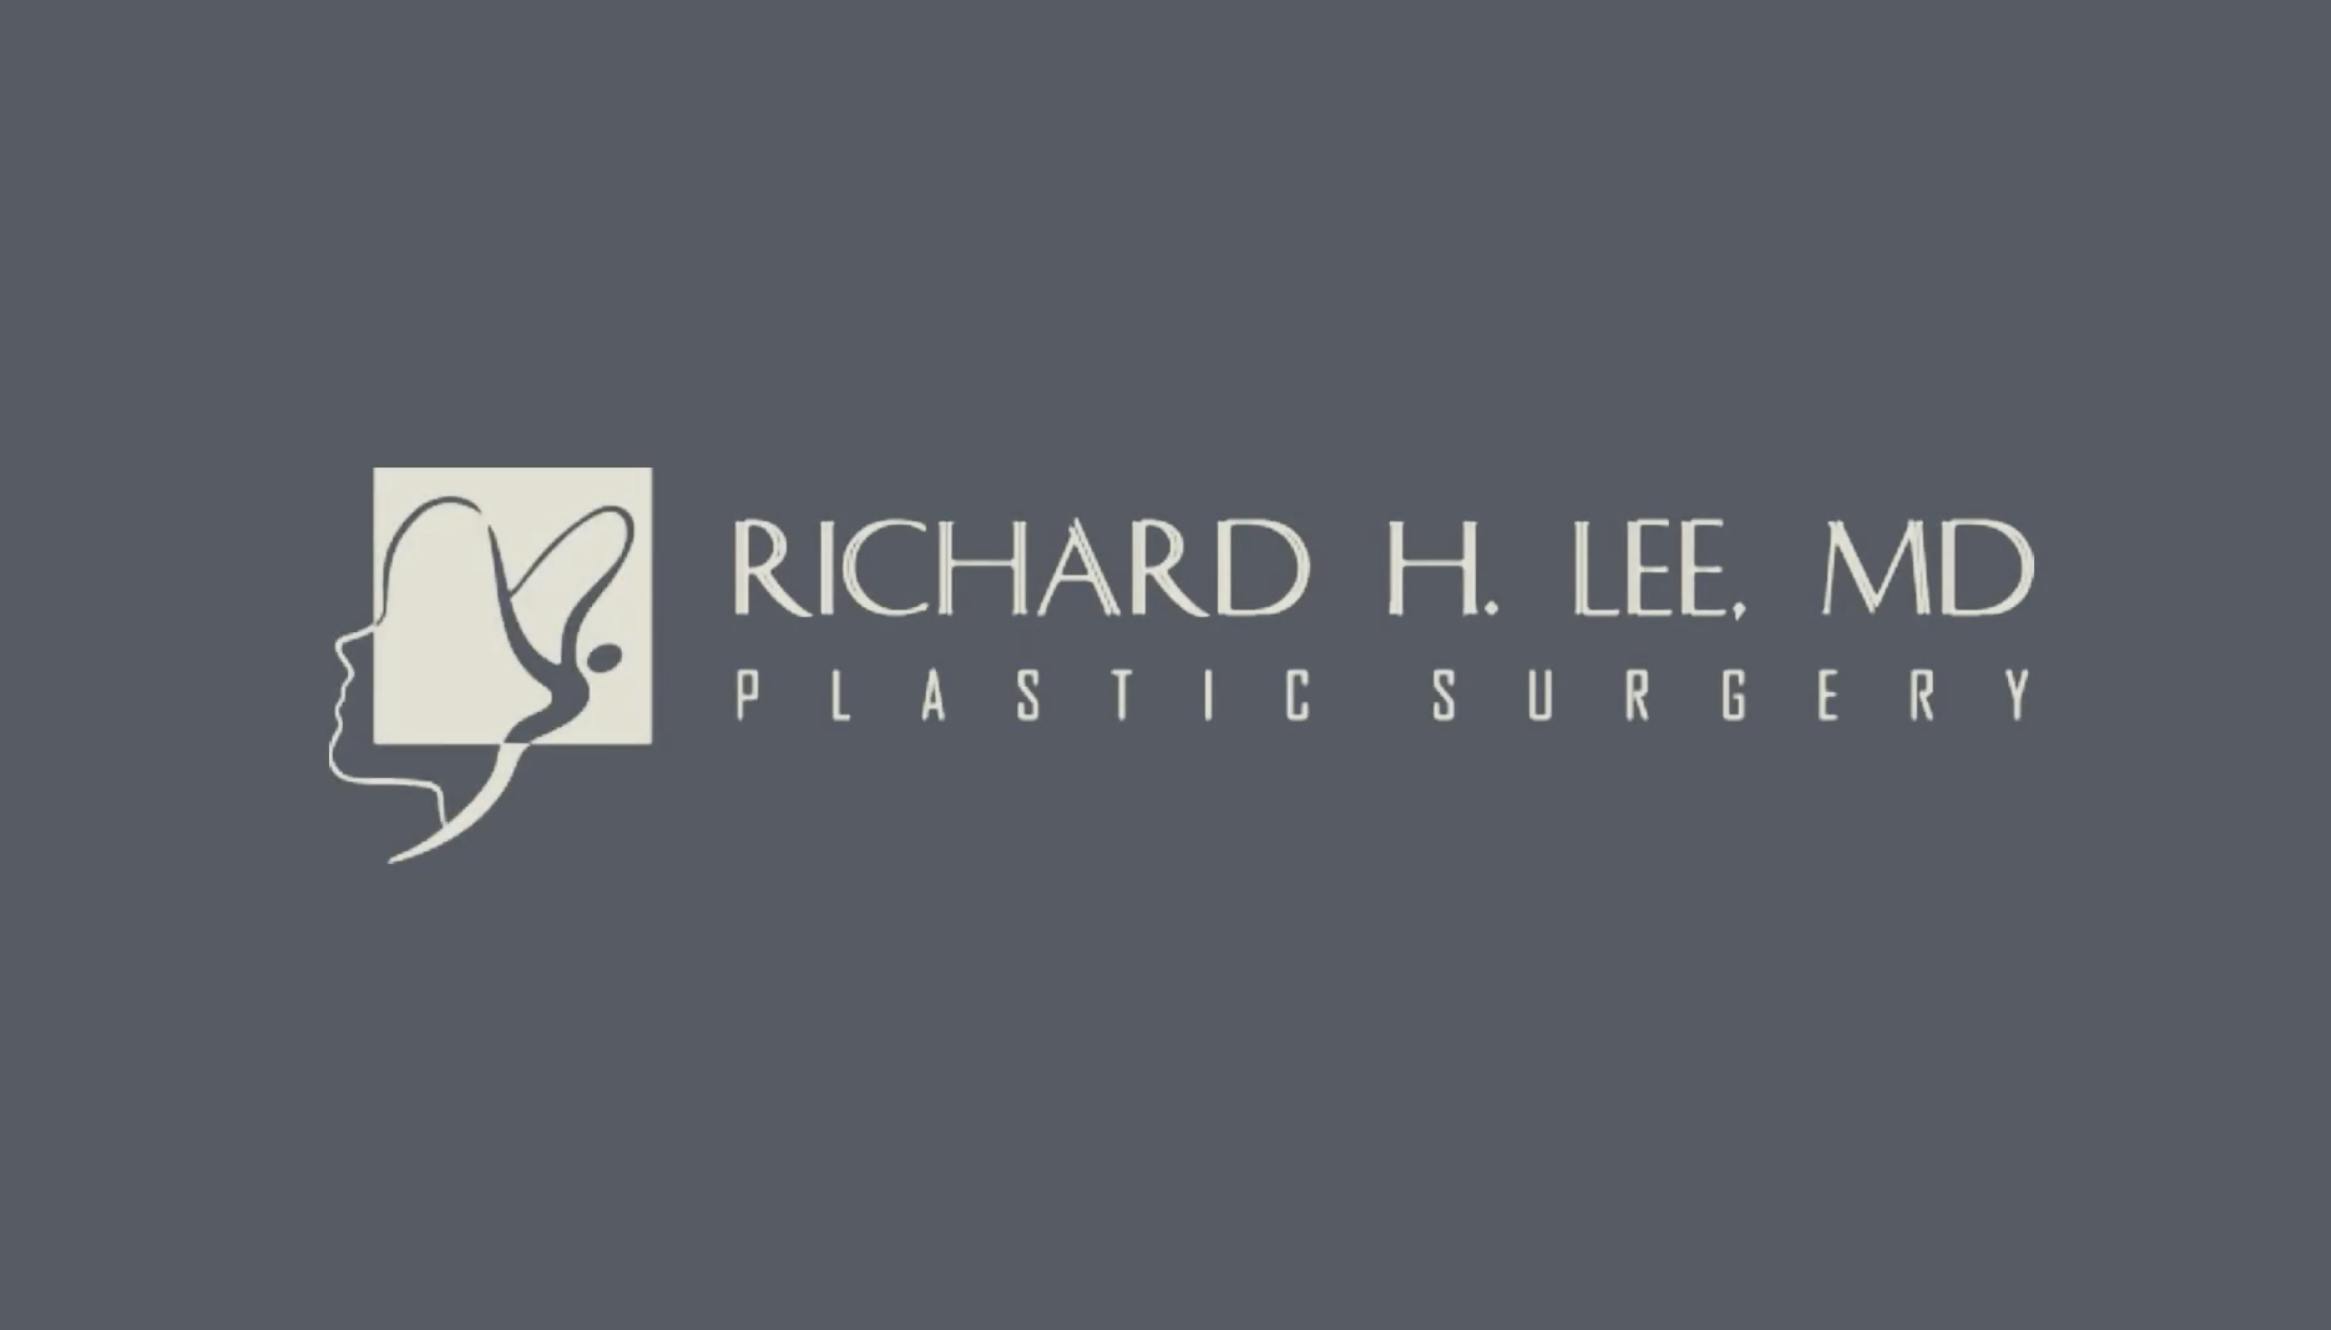 the Richard H. Lee MD Plastic Surgery